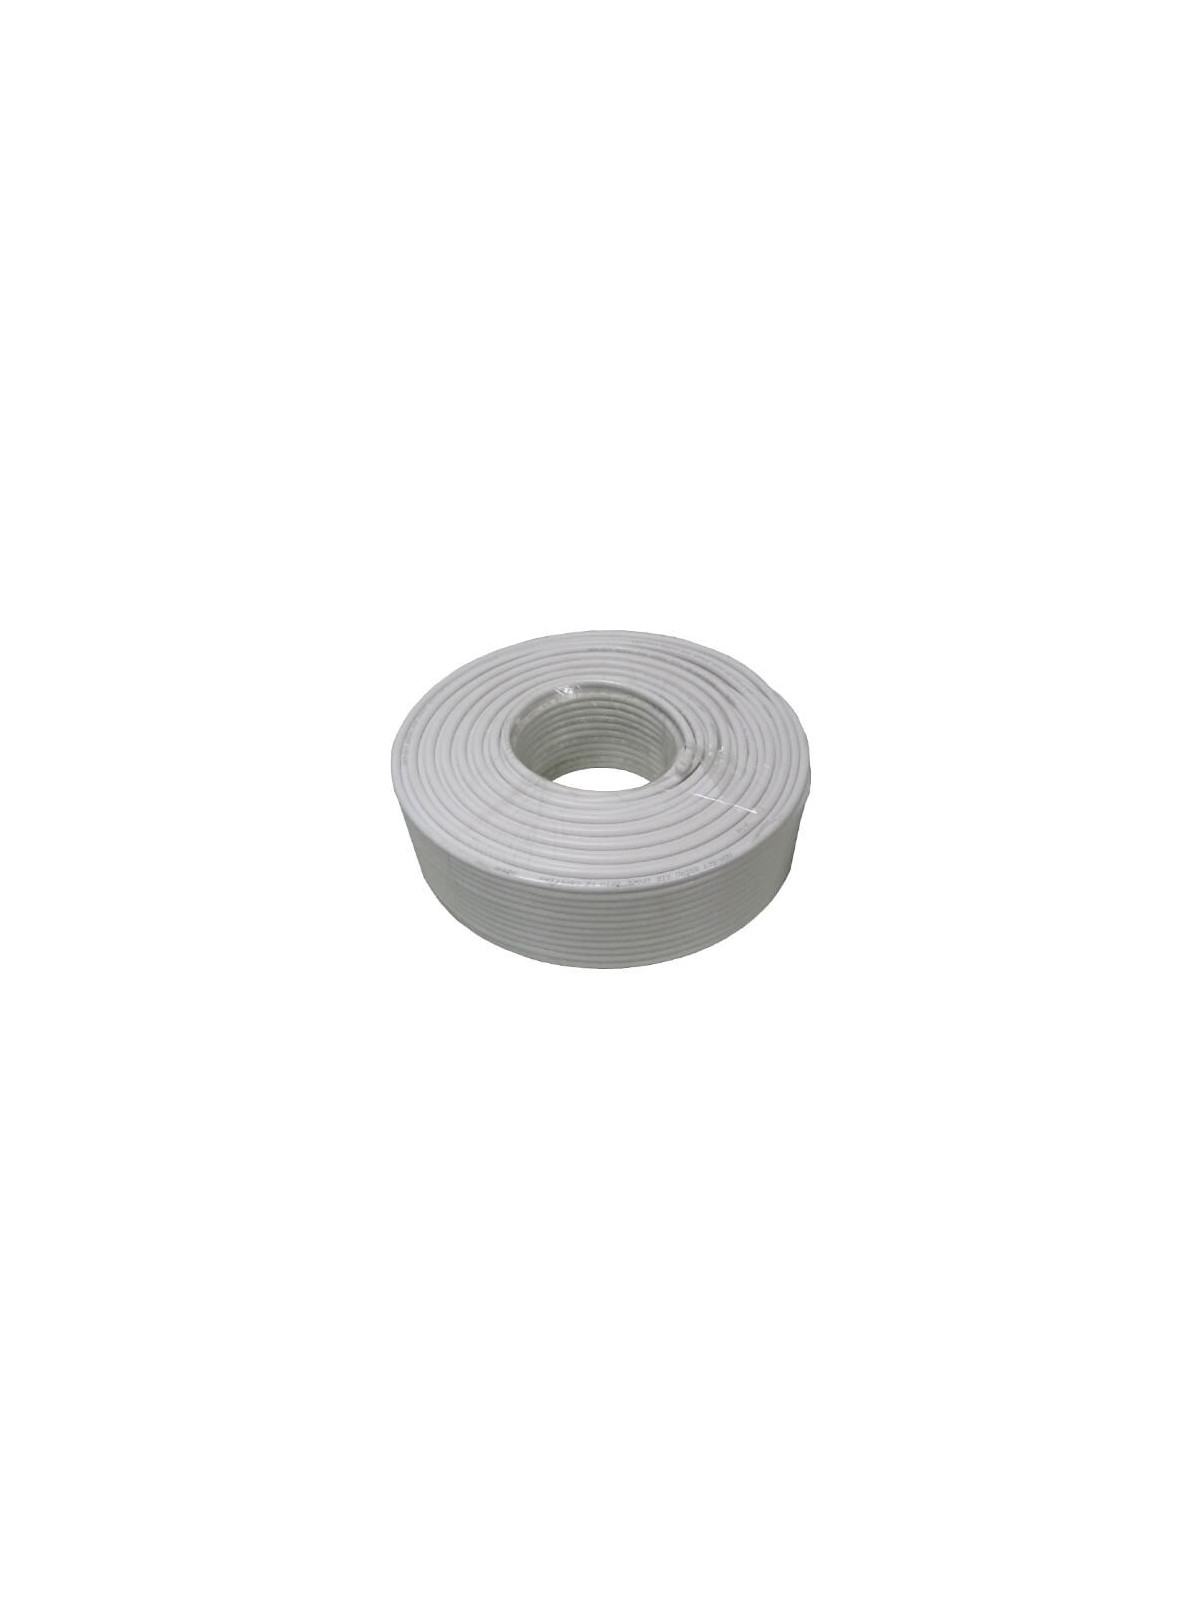 Cable coaxial RG59  Blanco (100m)